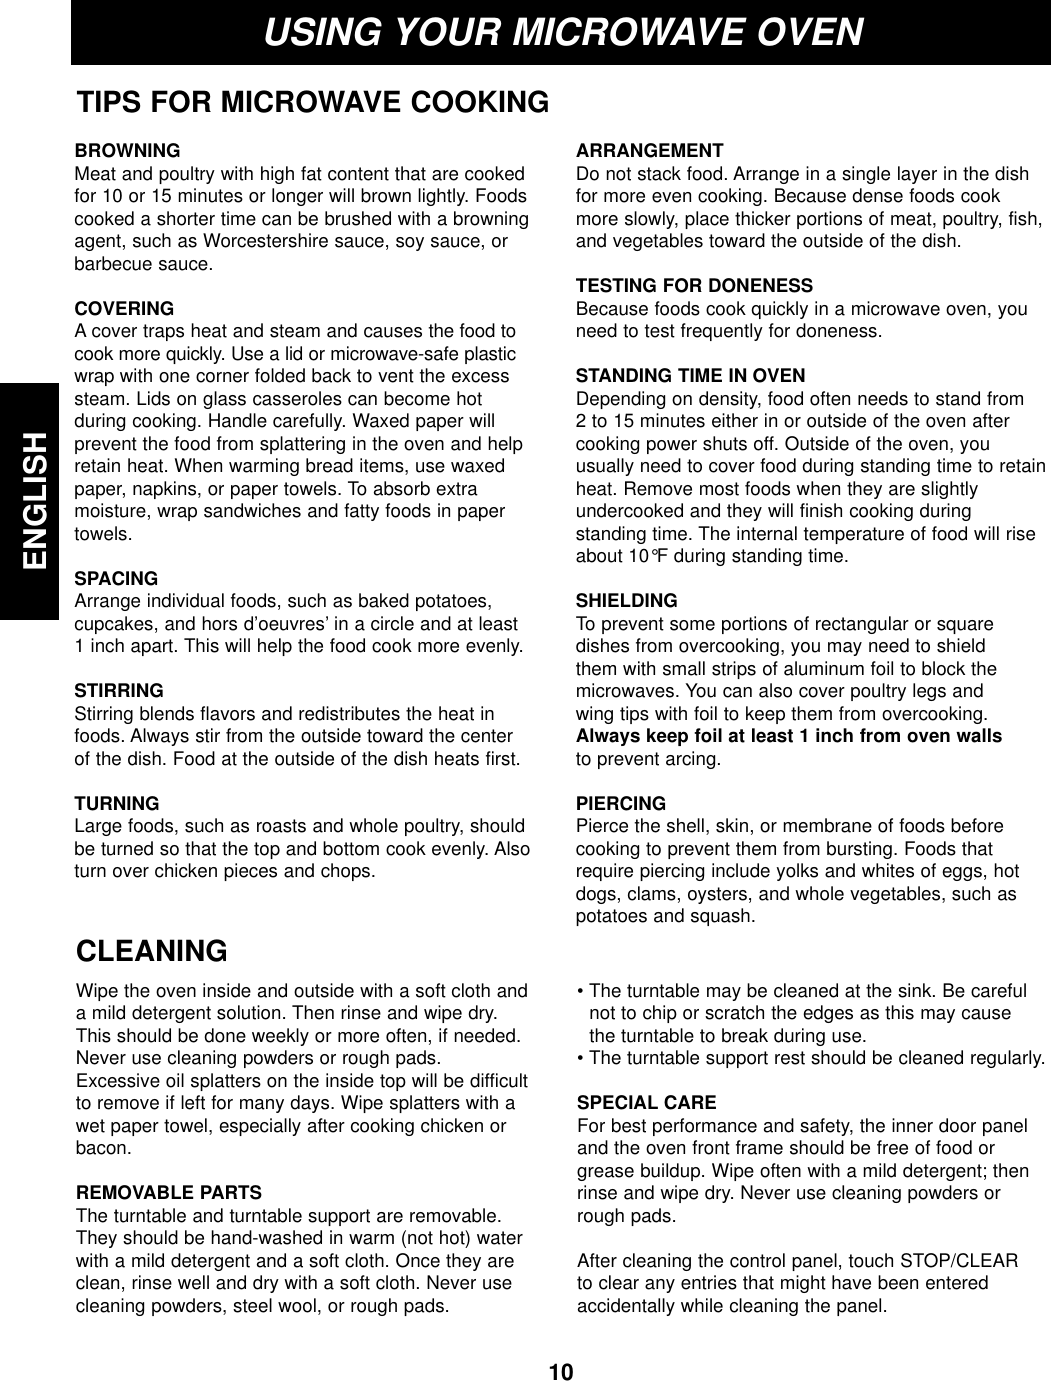 10ENGLISHUSING YOUR MICROWAVE OVENTIPS FOR MICROWAVE COOKINGBROWNINGMeat and poultry with high fat content that are cookedfor 10 or 15 minutes or longer will brown lightly. Foodscooked a shorter time can be brushed with a browningagent, such as Worcestershire sauce, soy sauce, orbarbecue sauce.COVERING A cover traps heat and steam and causes the food tocook more quickly. Use a lid or microwave-safe plasticwrap with one corner folded back to vent the excesssteam. Lids on glass casseroles can become hot during cooking. Handle carefully. Waxed paper will prevent the food from splattering in the oven and helpretain heat. When warming bread items, use waxedpaper, napkins, or paper towels. To absorb extra moisture, wrap sandwiches and fatty foods in papertowels.SPACINGArrange individual foods, such as baked potatoes, cupcakes, and hors d’oeuvres’ in a circle and at least 1 inch apart. This will help the food cook more evenly.STIRRING Stirring blends flavors and redistributes the heat infoods. Always stir from the outside toward the center of the dish. Food at the outside of the dish heats first.TURNINGLarge foods, such as roasts and whole poultry, shouldbe turned so that the top and bottom cook evenly. Alsoturn over chicken pieces and chops.ARRANGEMENTDo not stack food. Arrange in a single layer in the dishfor more even cooking. Because dense foods cookmore slowly, place thicker portions of meat, poultry, fish,and vegetables toward the outside of the dish.TESTING FOR DONENESS Because foods cook quickly in a microwave oven, youneed to test frequently for doneness.STANDING TIME IN OVEN Depending on density, food often needs to stand from 2 to 15 minutes either in or outside of the oven aftercooking power shuts off. Outside of the oven, youusually need to cover food during standing time to retainheat. Remove most foods when they are slightlyundercooked and they will finish cooking duringstanding time. The internal temperature of food will riseabout 10°F during standing time.SHIELDING To prevent some portions of rectangular or squaredishes from overcooking, you may need to shield them with small strips of aluminum foil to block themicrowaves. You can also cover poultry legs and wing tips with foil to keep them from overcooking.Always keep foil at least 1 inch from oven wallsto prevent arcing.PIERCING Pierce the shell, skin, or membrane of foods beforecooking to prevent them from bursting. Foods thatrequire piercing include yolks and whites of eggs, hotdogs, clams, oysters, and whole vegetables, such aspotatoes and squash.CLEANINGWipe the oven inside and outside with a soft cloth anda mild detergent solution. Then rinse and wipe dry.This should be done weekly or more often, if needed.Never use cleaning powders or rough pads.Excessive oil splatters on the inside top will be difficultto remove if left for many days. Wipe splatters with awet paper towel, especially after cooking chicken orbacon.REMOVABLE PARTSThe turntable and turntable support are removable.They should be hand-washed in warm (not hot) waterwith a mild detergent and a soft cloth. Once they areclean, rinse well and dry with a soft cloth. Never usecleaning powders, steel wool, or rough pads.• The turntable may be cleaned at the sink. Be carefulnot to chip or scratch the edges as this may causethe turntable to break during use.• The turntable support rest should be cleaned regularly.SPECIAL CAREFor best performance and safety, the inner door paneland the oven front frame should be free of food orgrease buildup. Wipe often with a mild detergent; thenrinse and wipe dry. Never use cleaning powders orrough pads.After cleaning the control panel, touch STOP/CLEARto clear any entries that might have been enteredaccidentally while cleaning the panel.